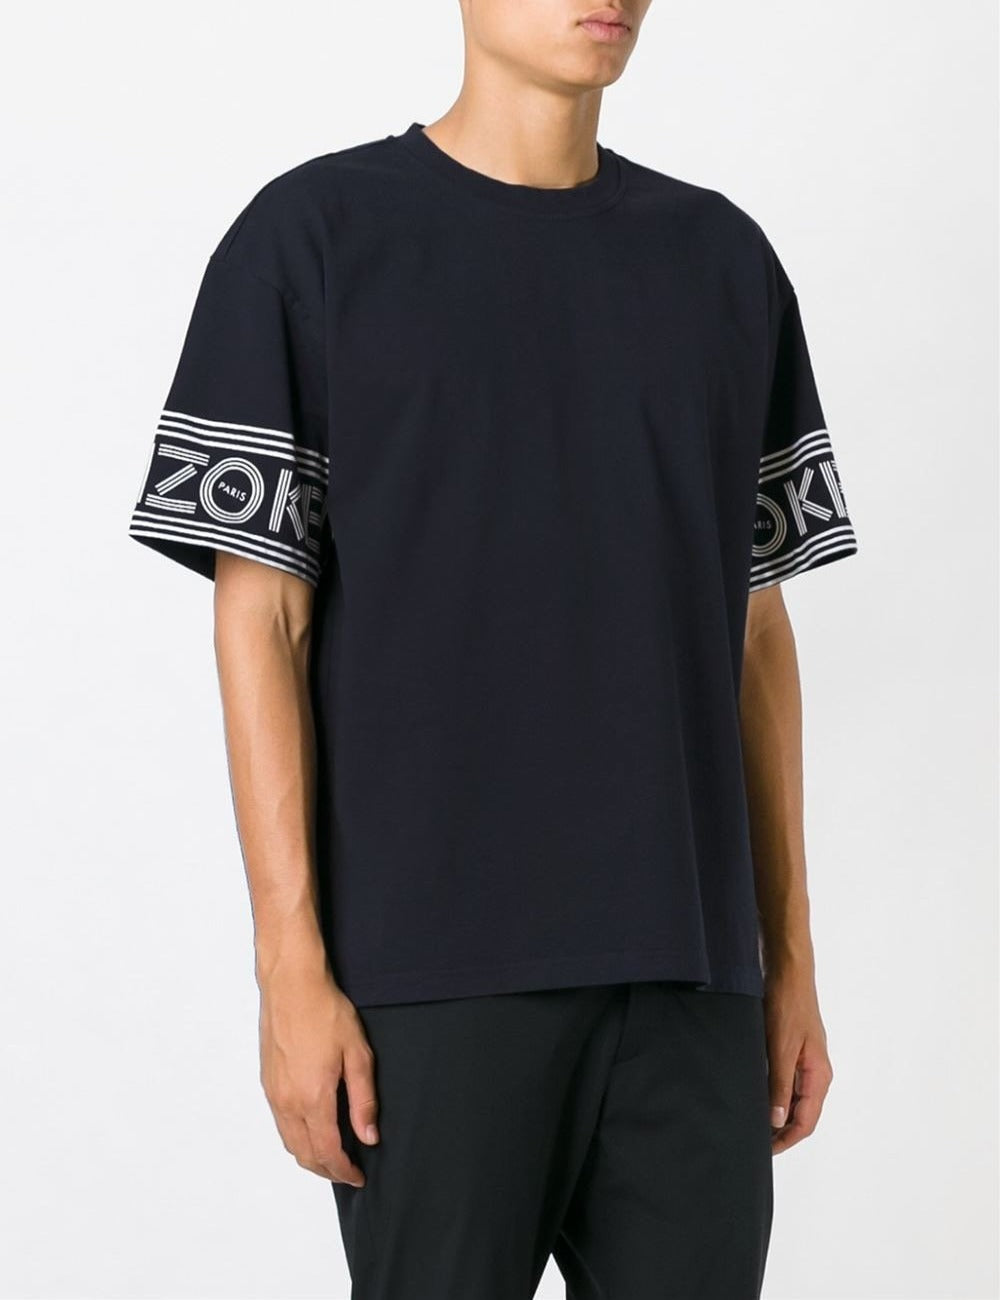 Kenzo Sleeve Print Logo T-Shirt (Black) - Shop Streetwear, Sneakers, Slippers and Gifts online | Malaysia - The Factory KL